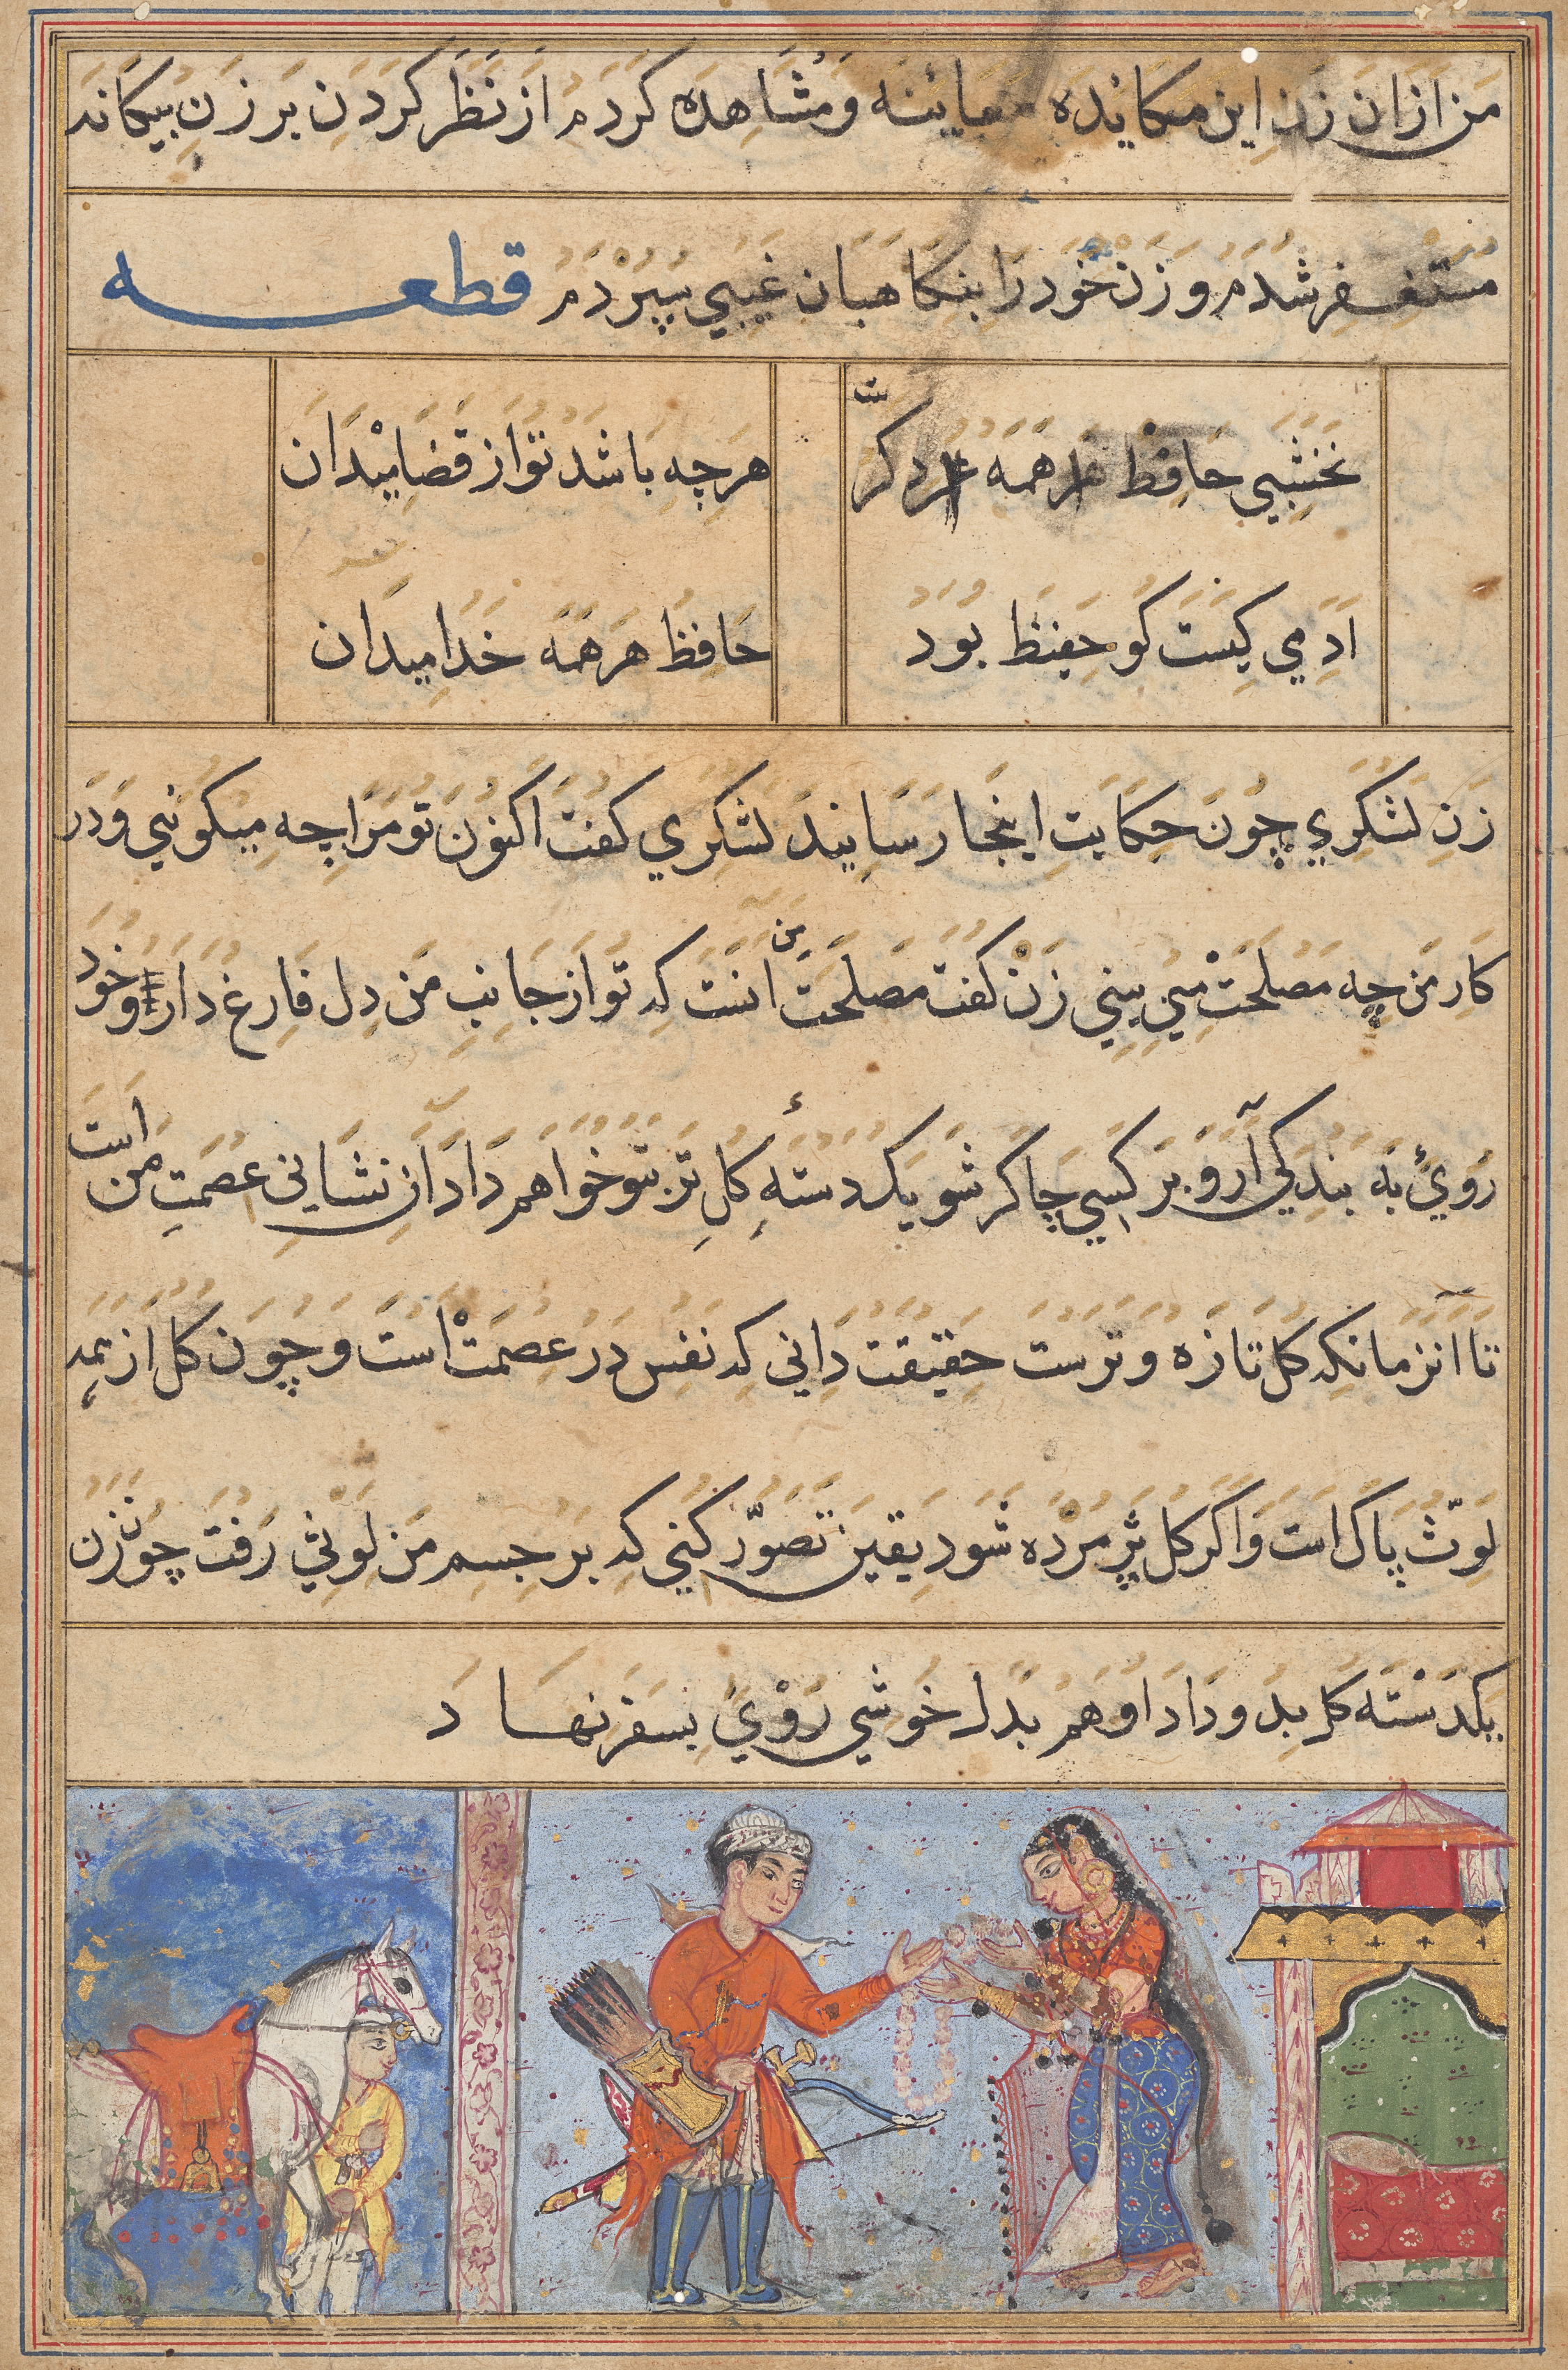 The soldier receives a garland of roses from his wife which will remain fresh as long as she is faithful, from a Tuti-nama (Tales of a Parrot): Fourth Night